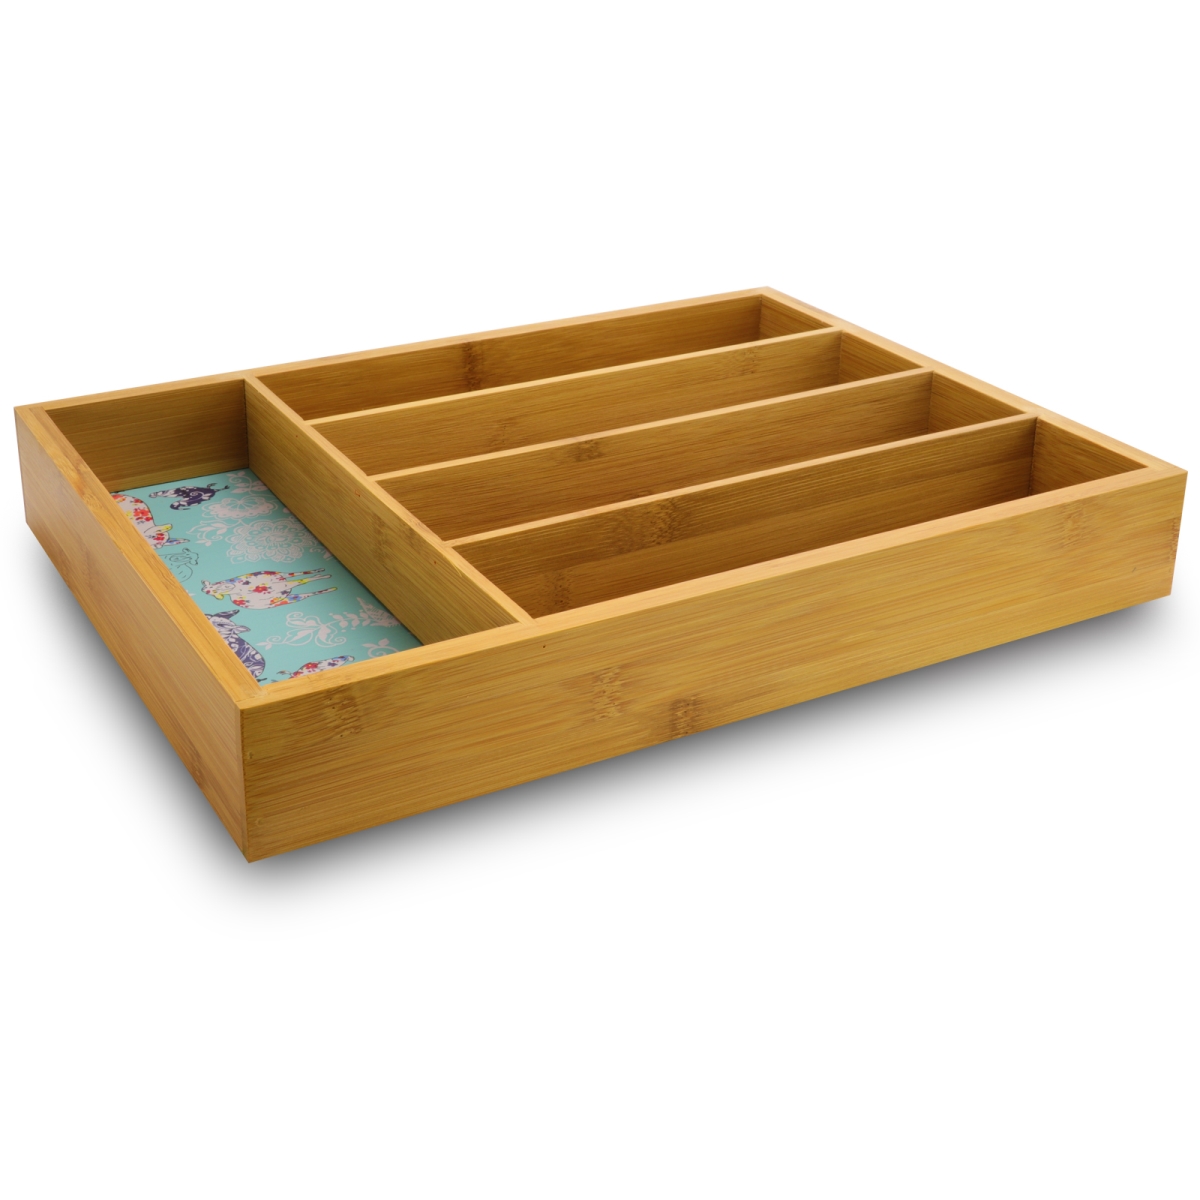 122884.01 14 In. Life On The Farm 5 Compartment Bamboo Utensil Tray In Farm & Floral Pattern